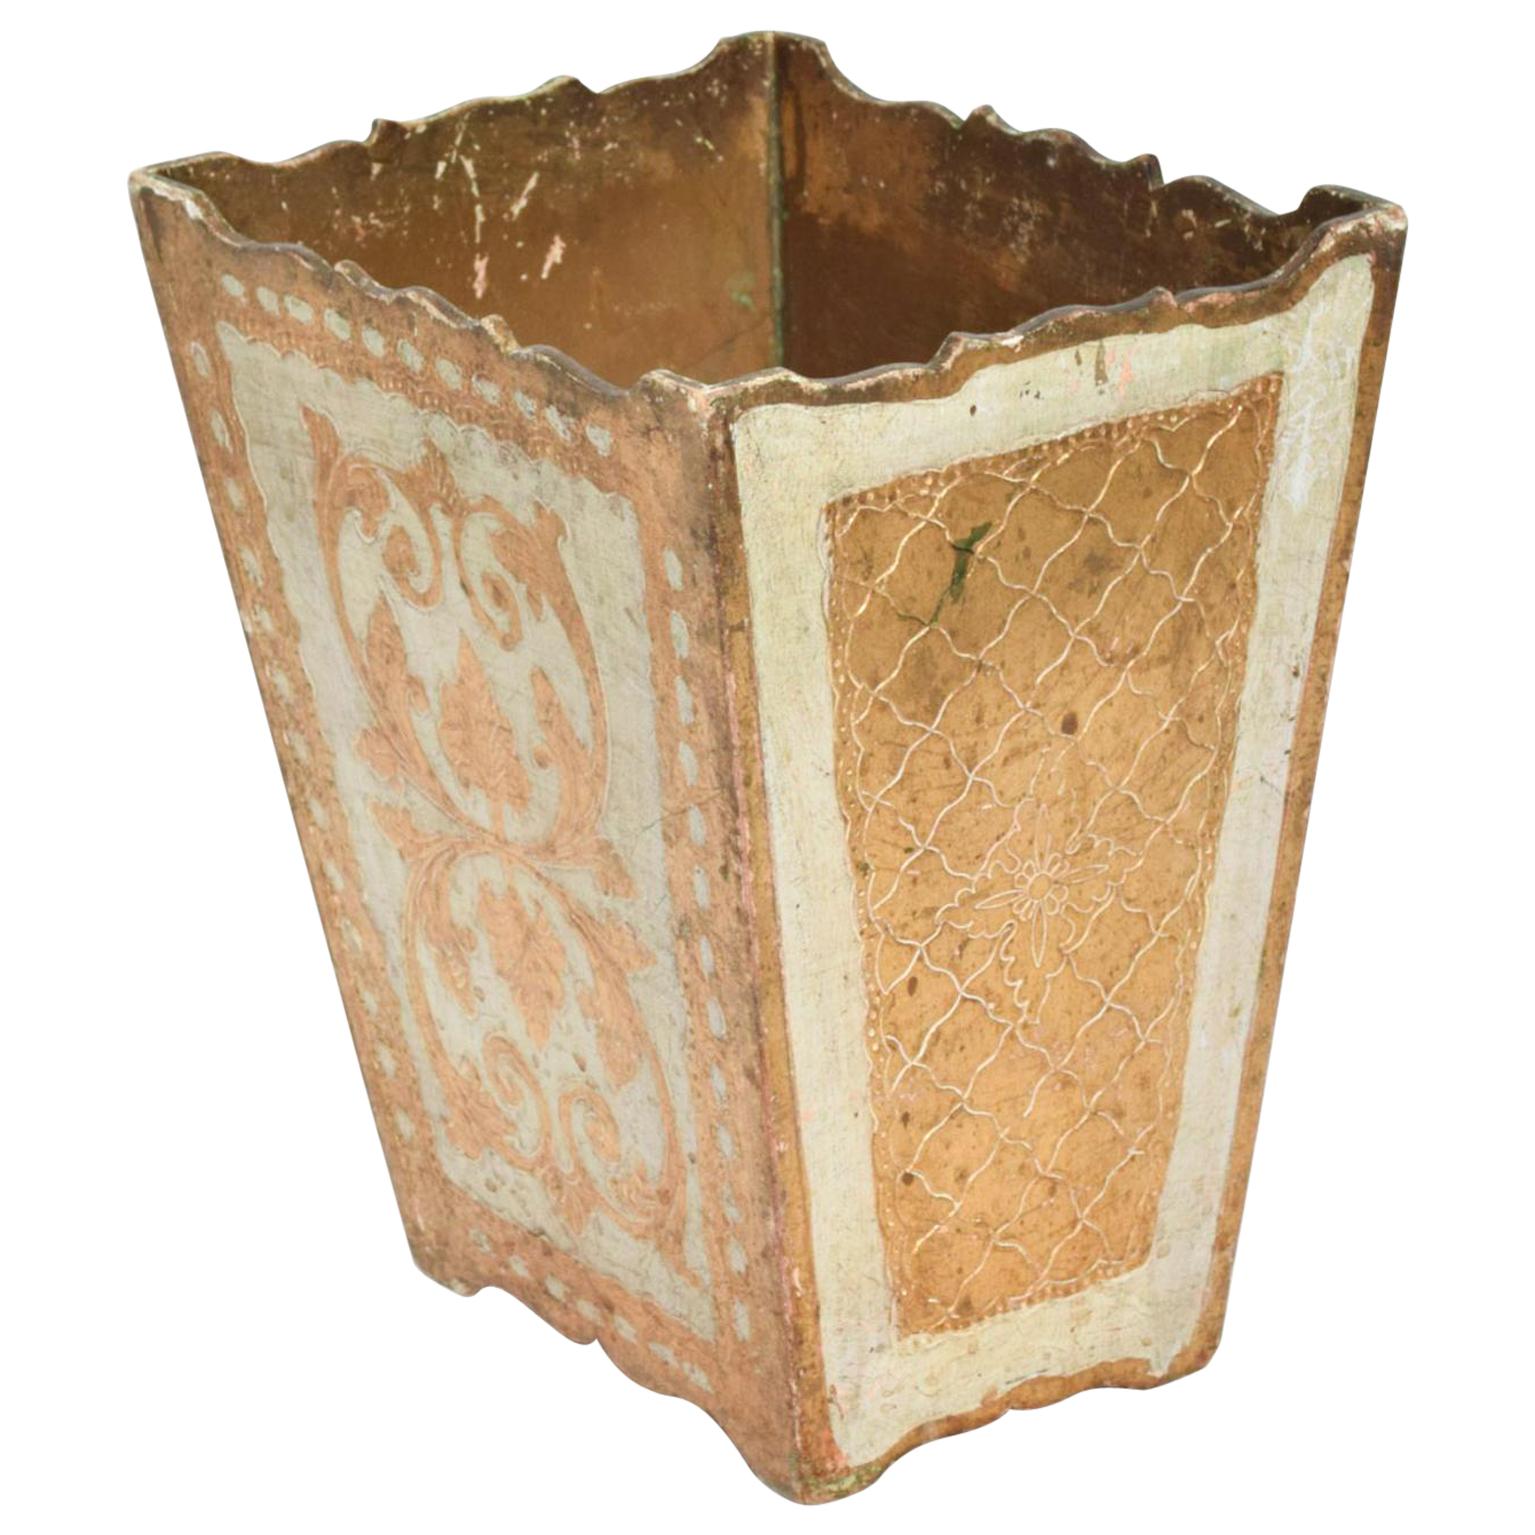 We are pleased to offer for you: Italian traditional Florentine neoclassical wastebasket trash can receptacle in giltwood gold with creamy ivory. Fancy Scalloped edges. Vintage Ornate elegance.
Stamped made in Italy. 
Dimensions: 12 H x 8 D x